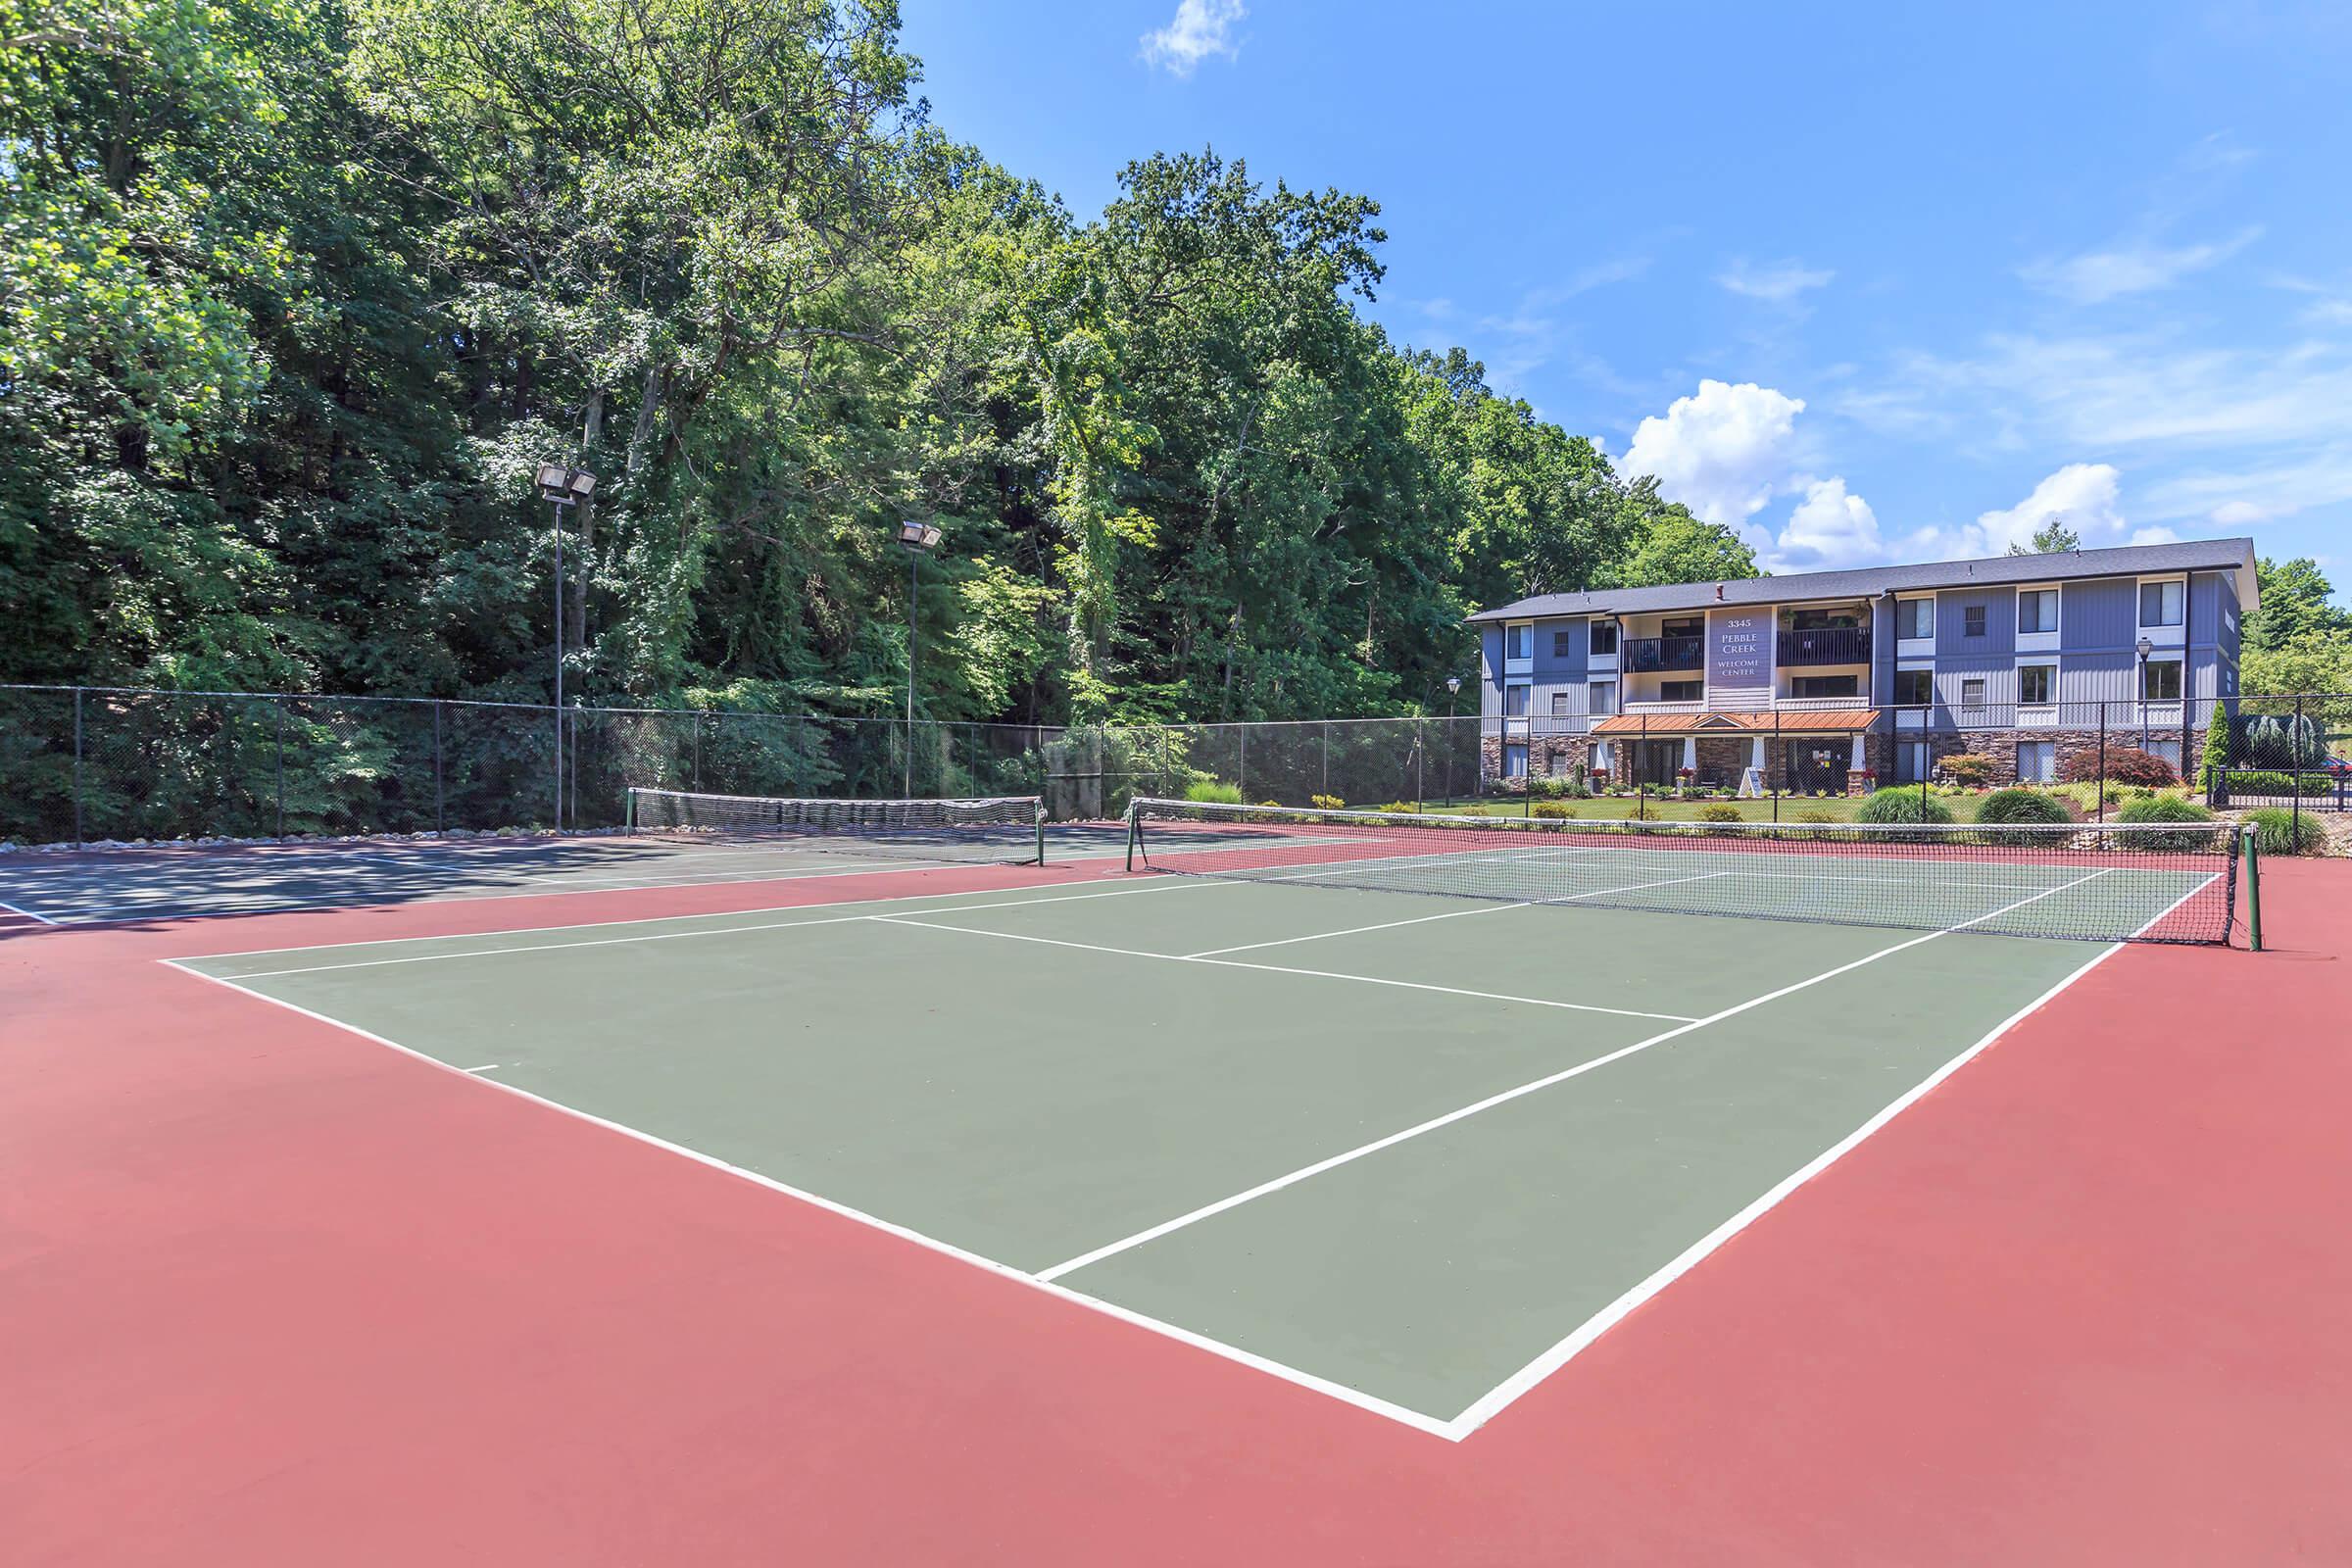 LIGHTED TENNIS COURTS